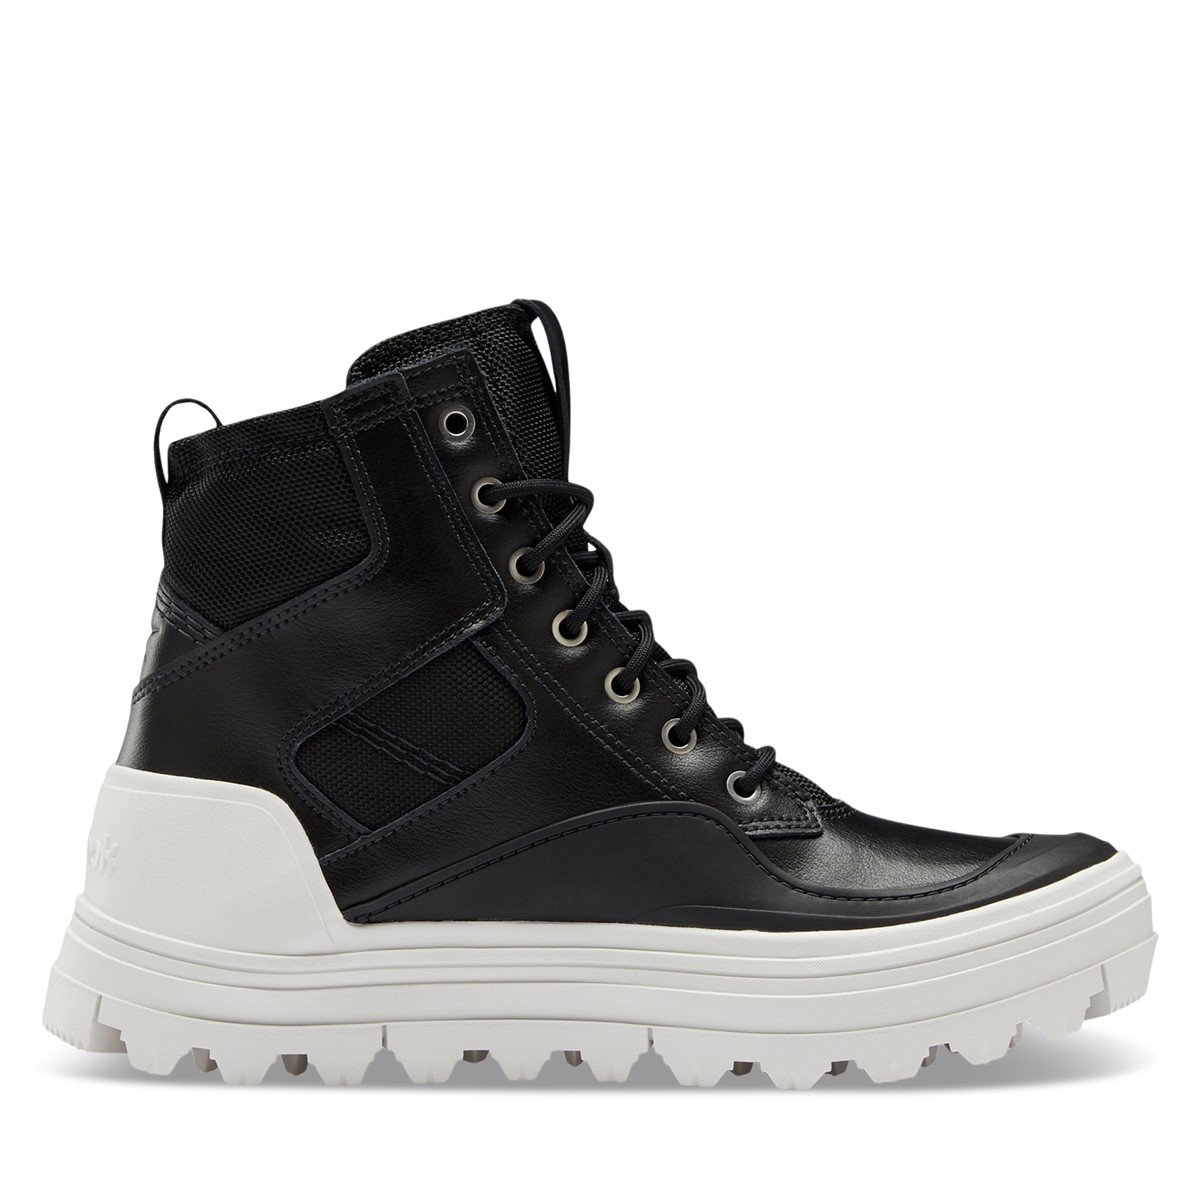 Women's Club C Cleated Mid High Top Sneakers in Black/White